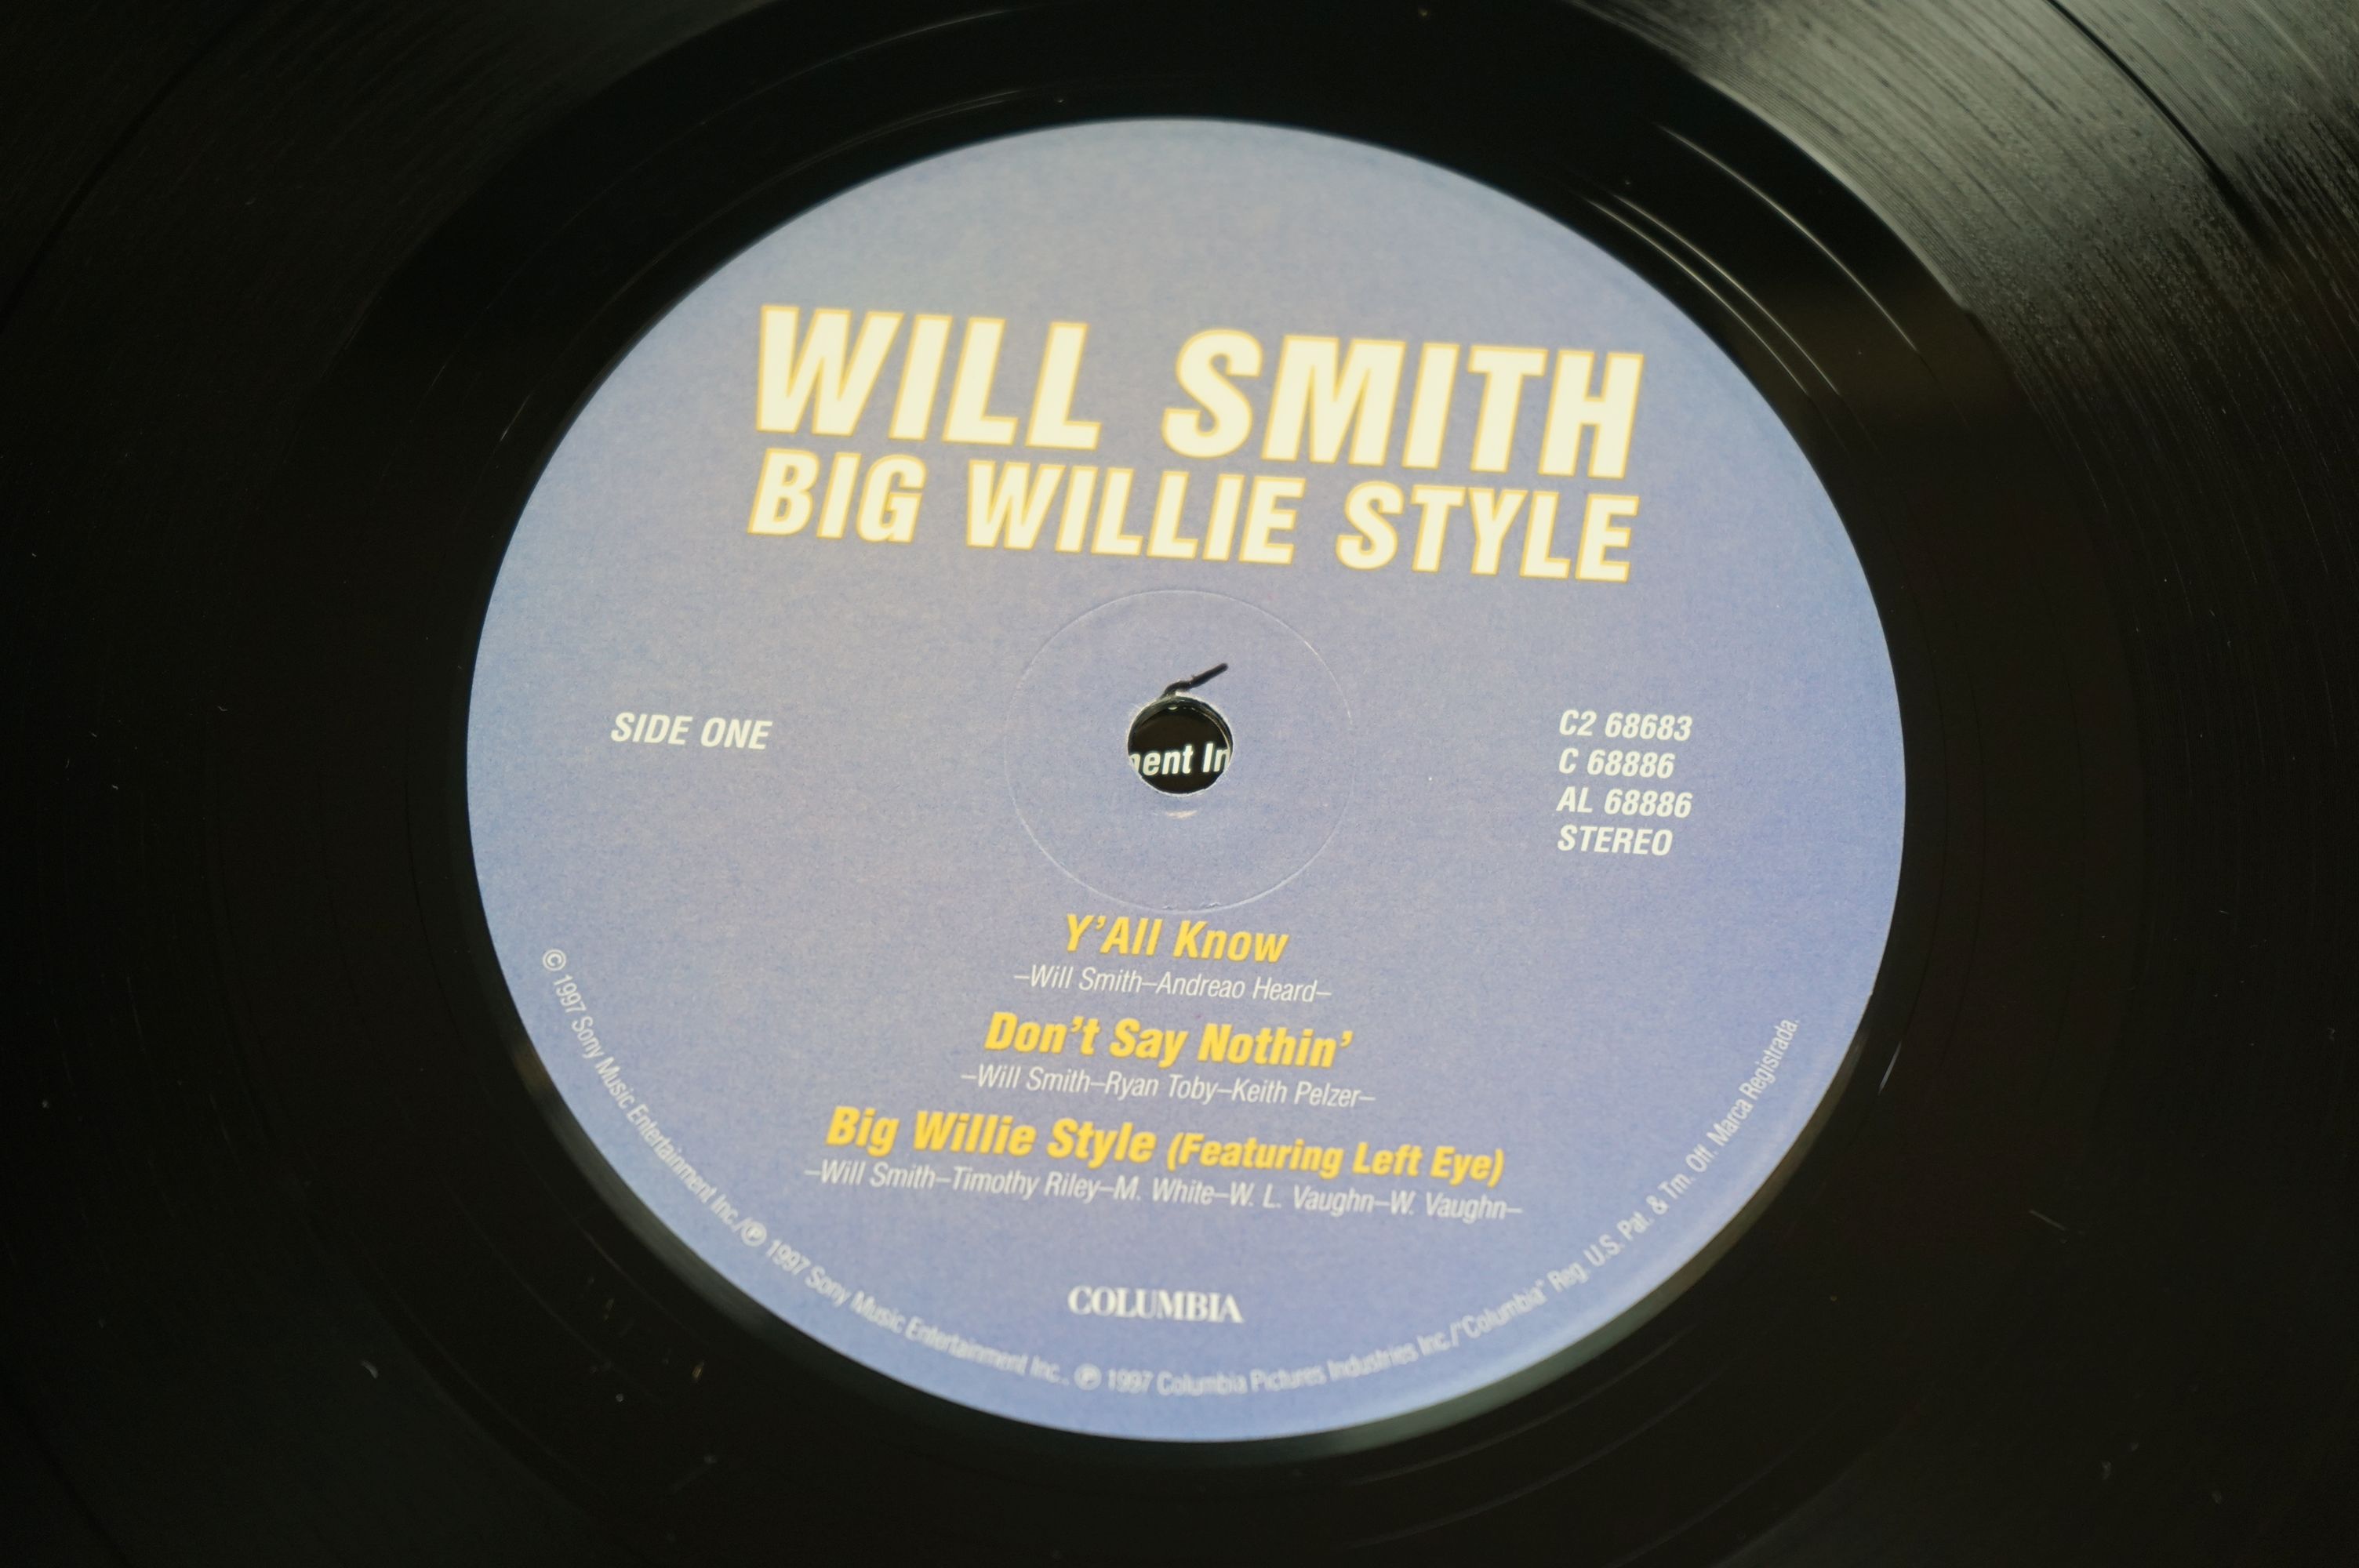 Vinyl - Will Smith Big Willie Style 2 LP on Columbia C2 68683, with inners, sleeve with creasing, vg - Image 5 of 8